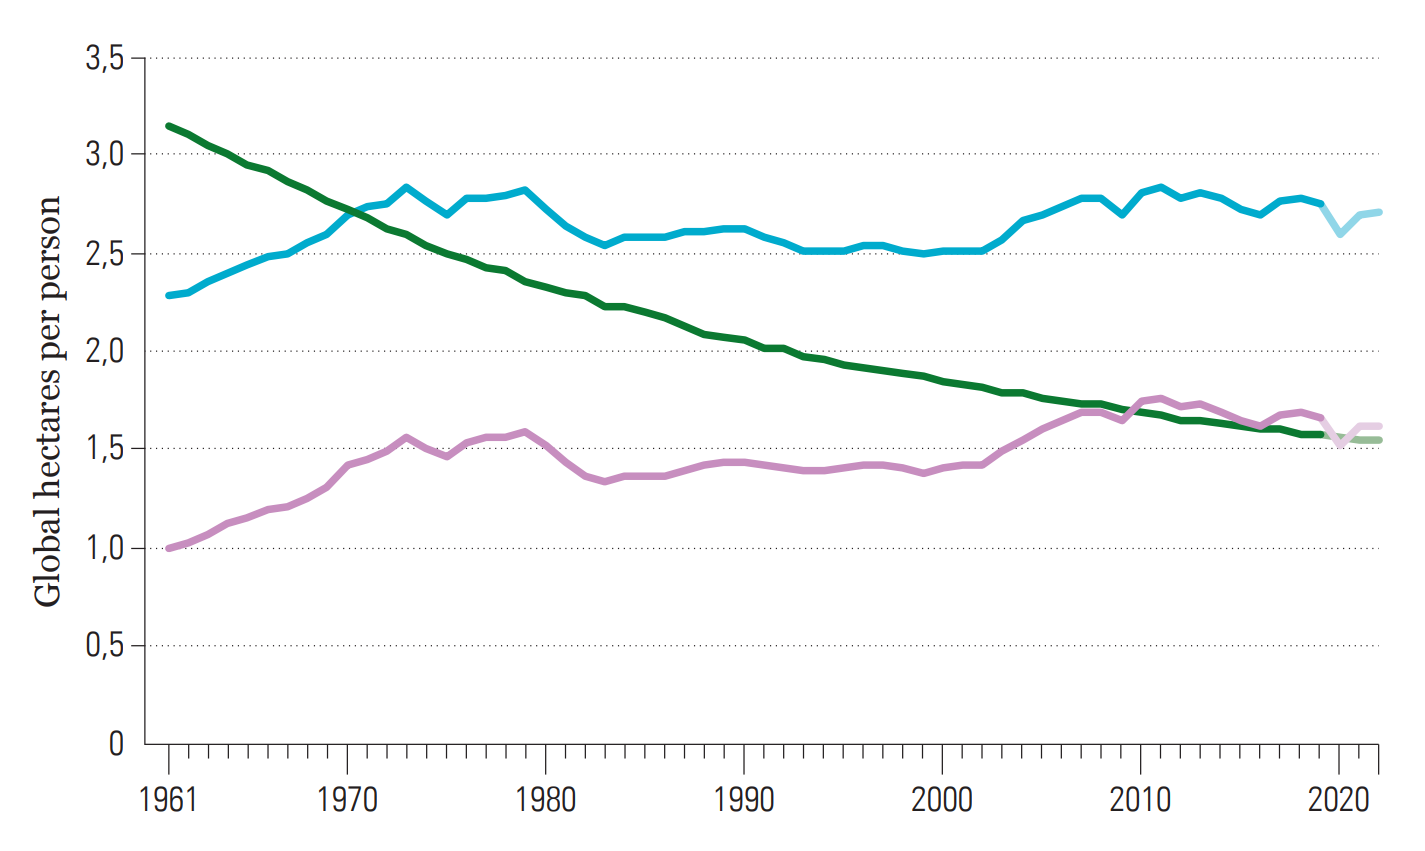 The global Ecological Footprint and biocapacity, 1961-2022 in global hectares per person. The blue line is the total Ecological Footprint per person, and the pink line is the Carbon Footprint per person (a subset of the Ecological Footprint). The green line shows the biocapacity per person. Results for 2019-2022 are nowcast estimates; remaining data points are directly taken from the National Footprint and Biocapacity Accounts, 2022 edition. Graphic: WWF / ZSL